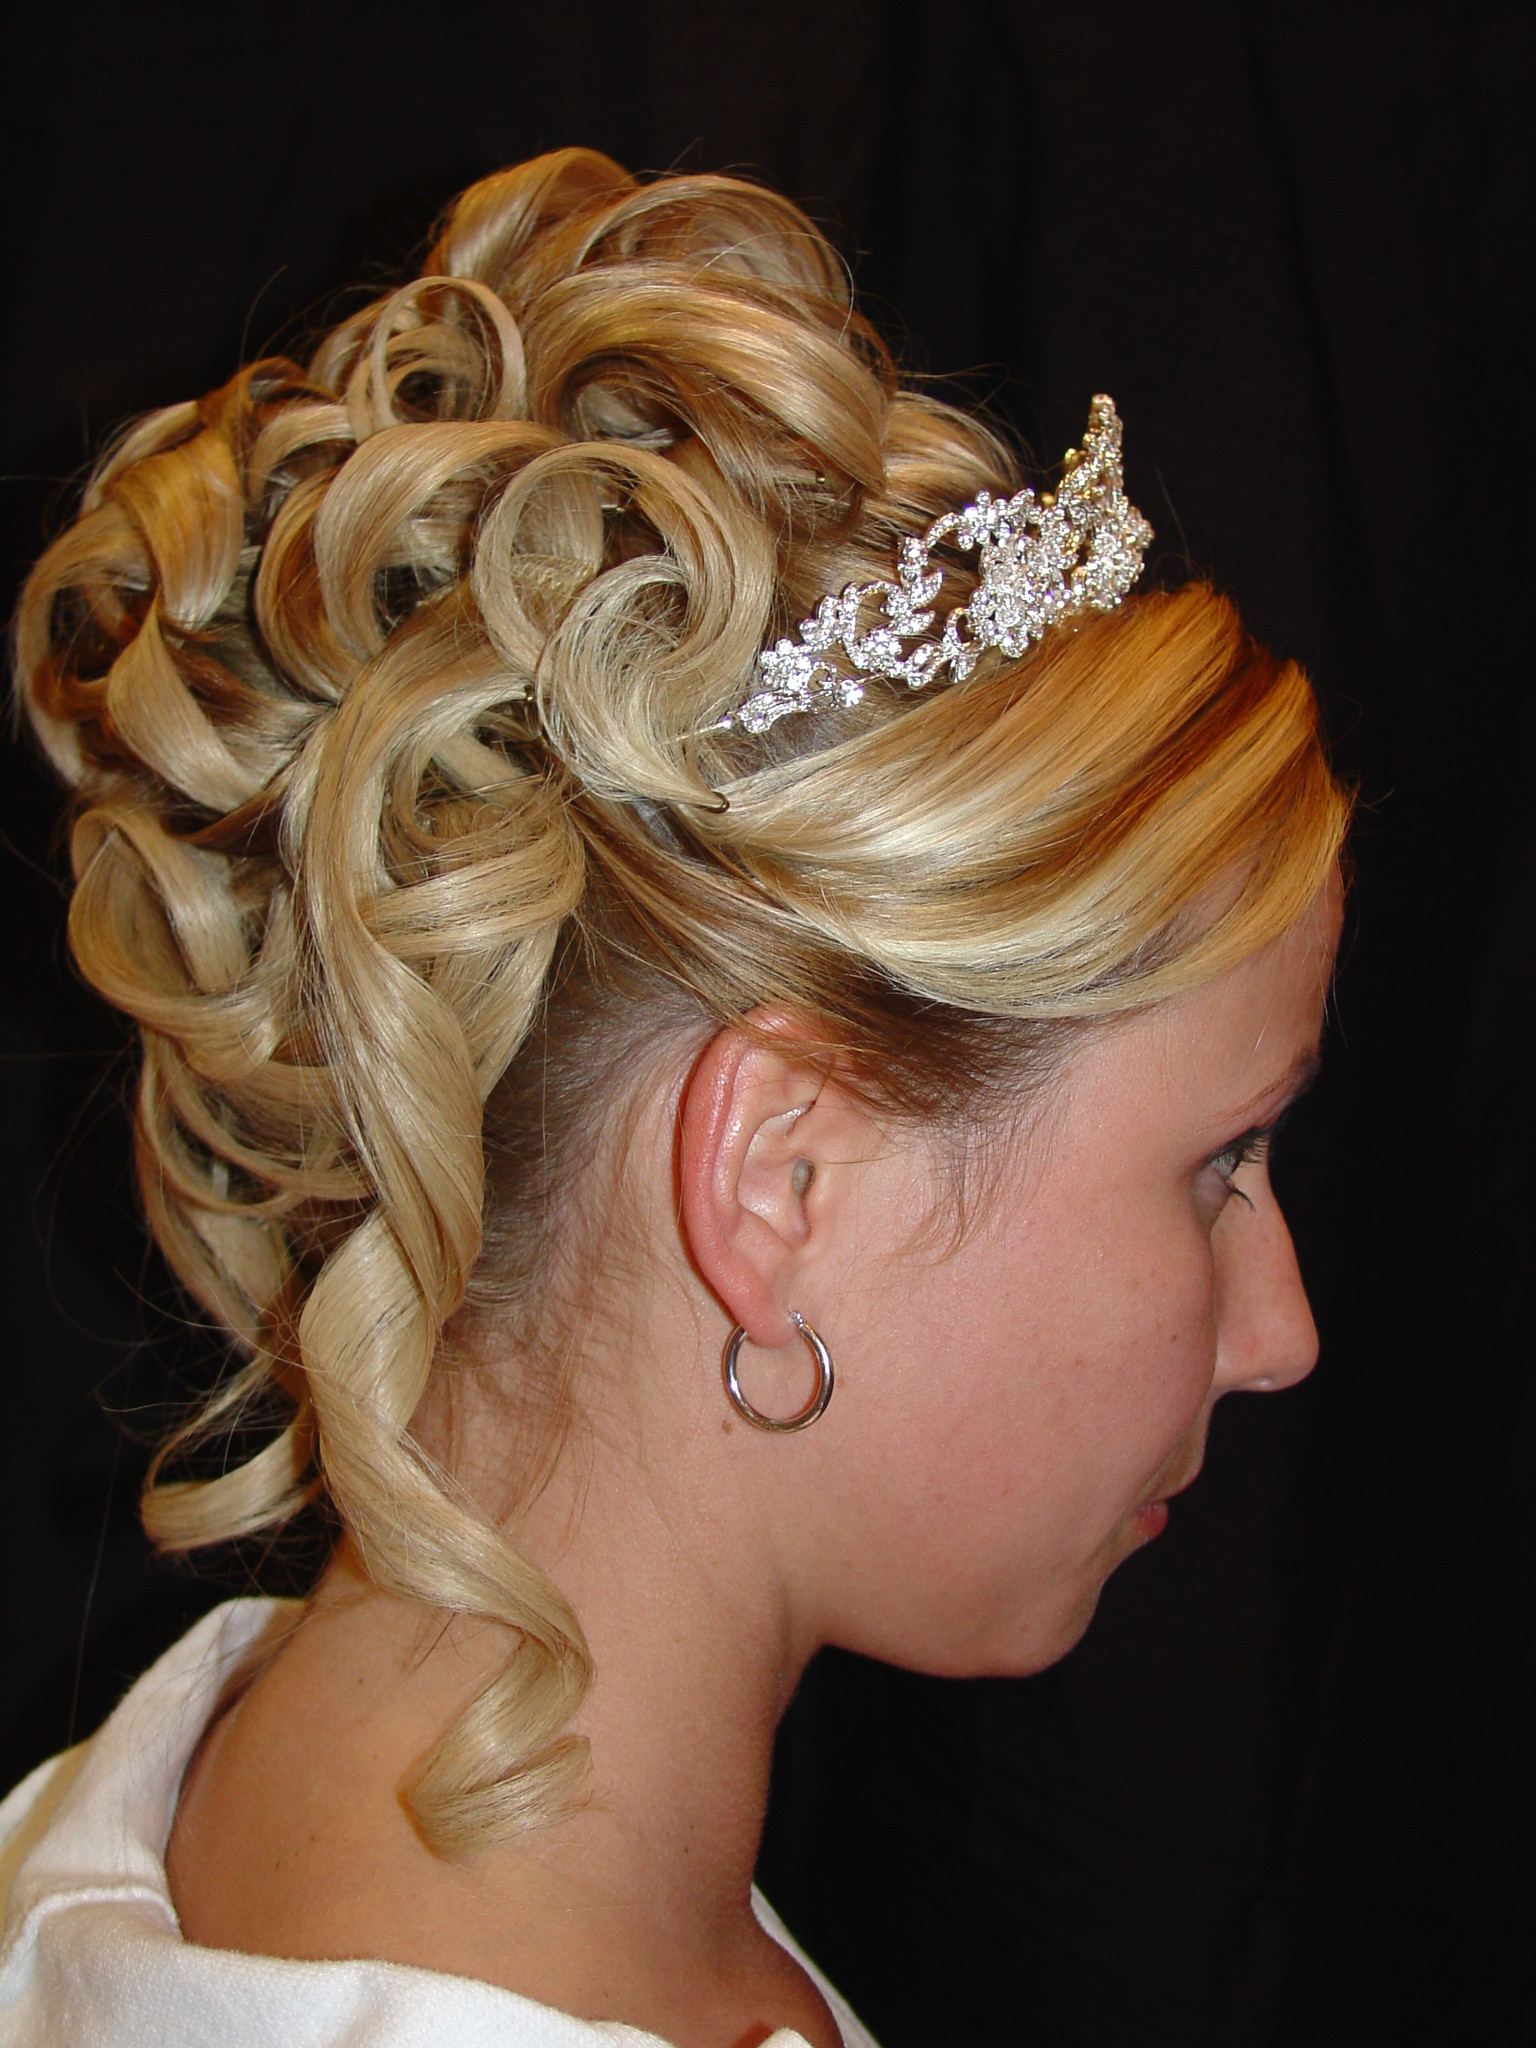 Pretty Hairstyles For Prom
 Updo Hairstyles For Prom